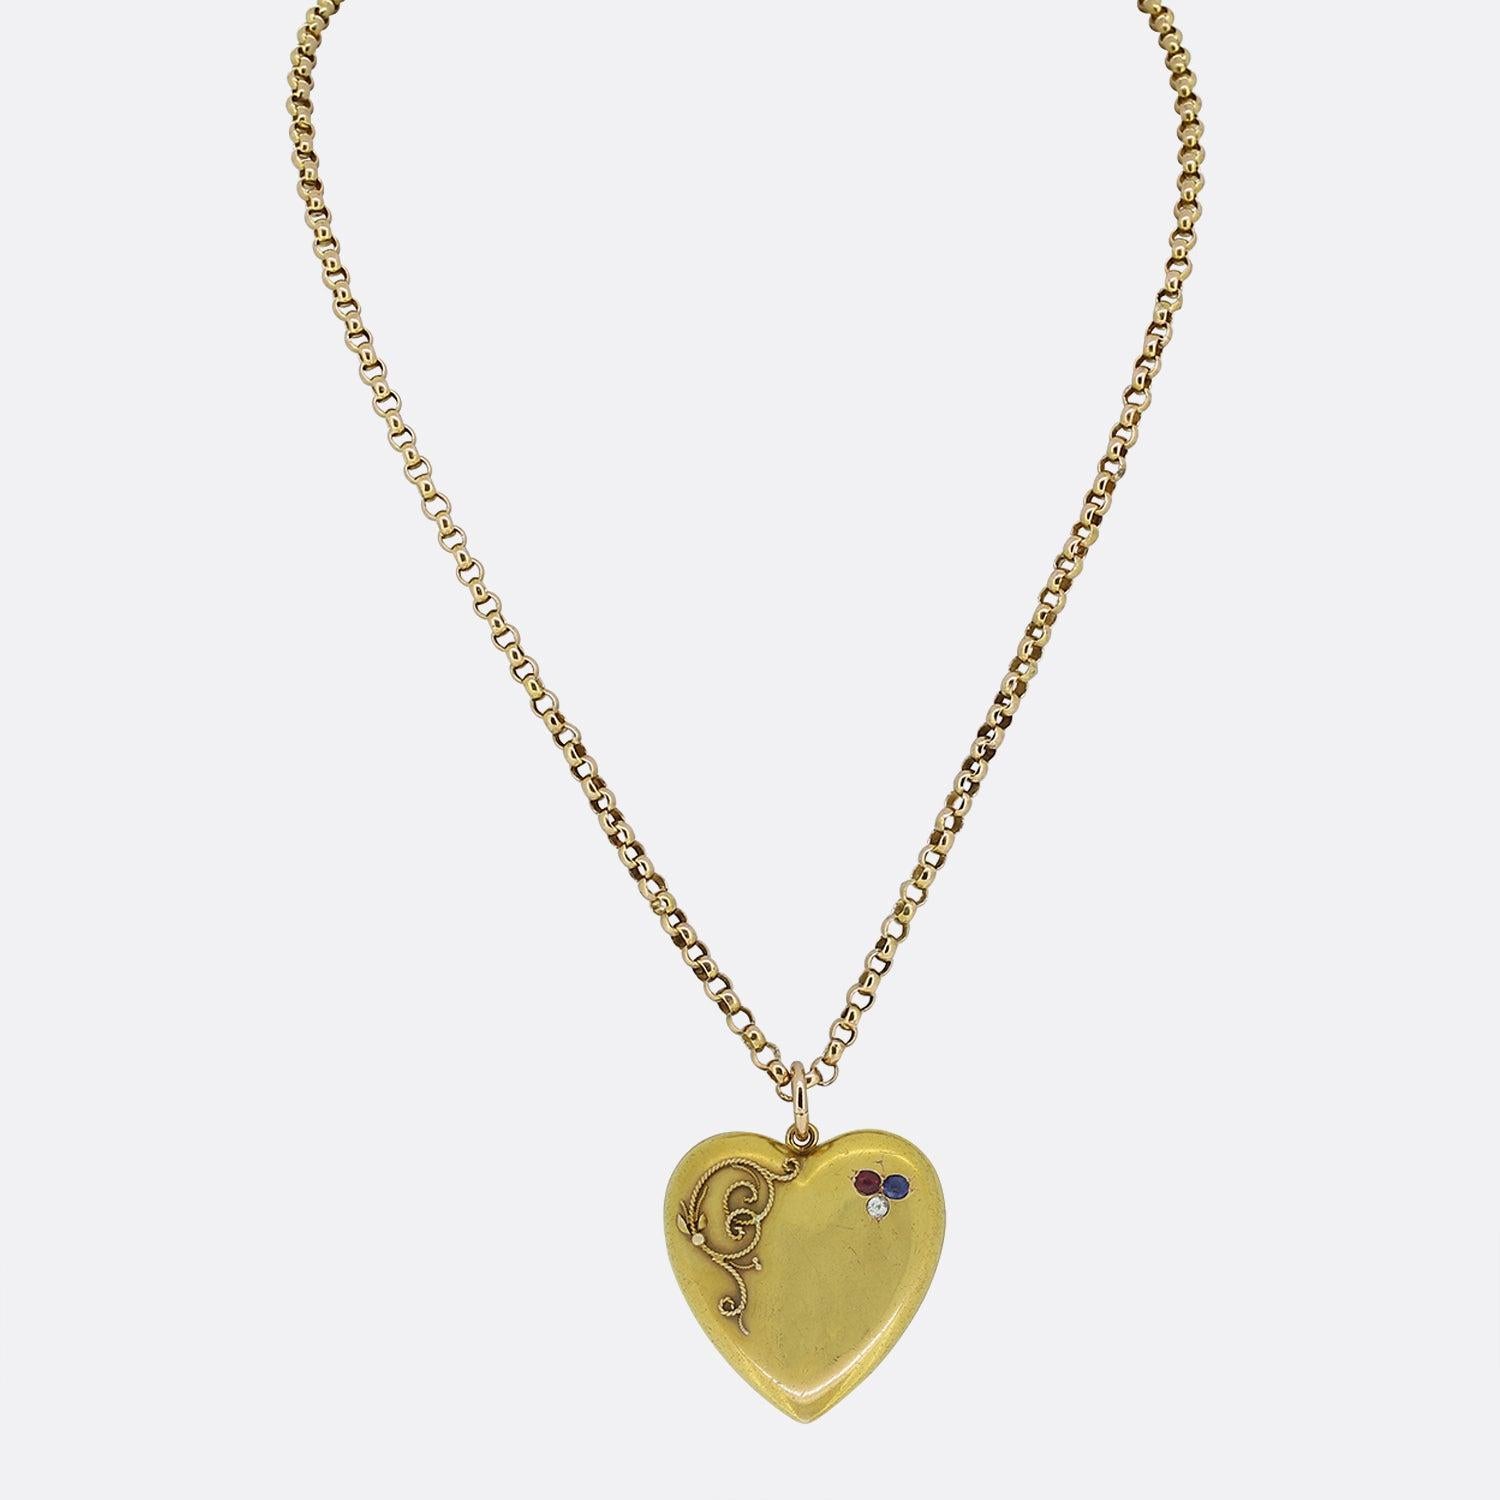 This is a beautiful antique Victorian heart pendant necklace. The pendant is heart shaped and has been set with a ruby, sapphire and diamond in a clover motif with a floral style rope effect on the left side of the heart. It has been crafted in 15ct